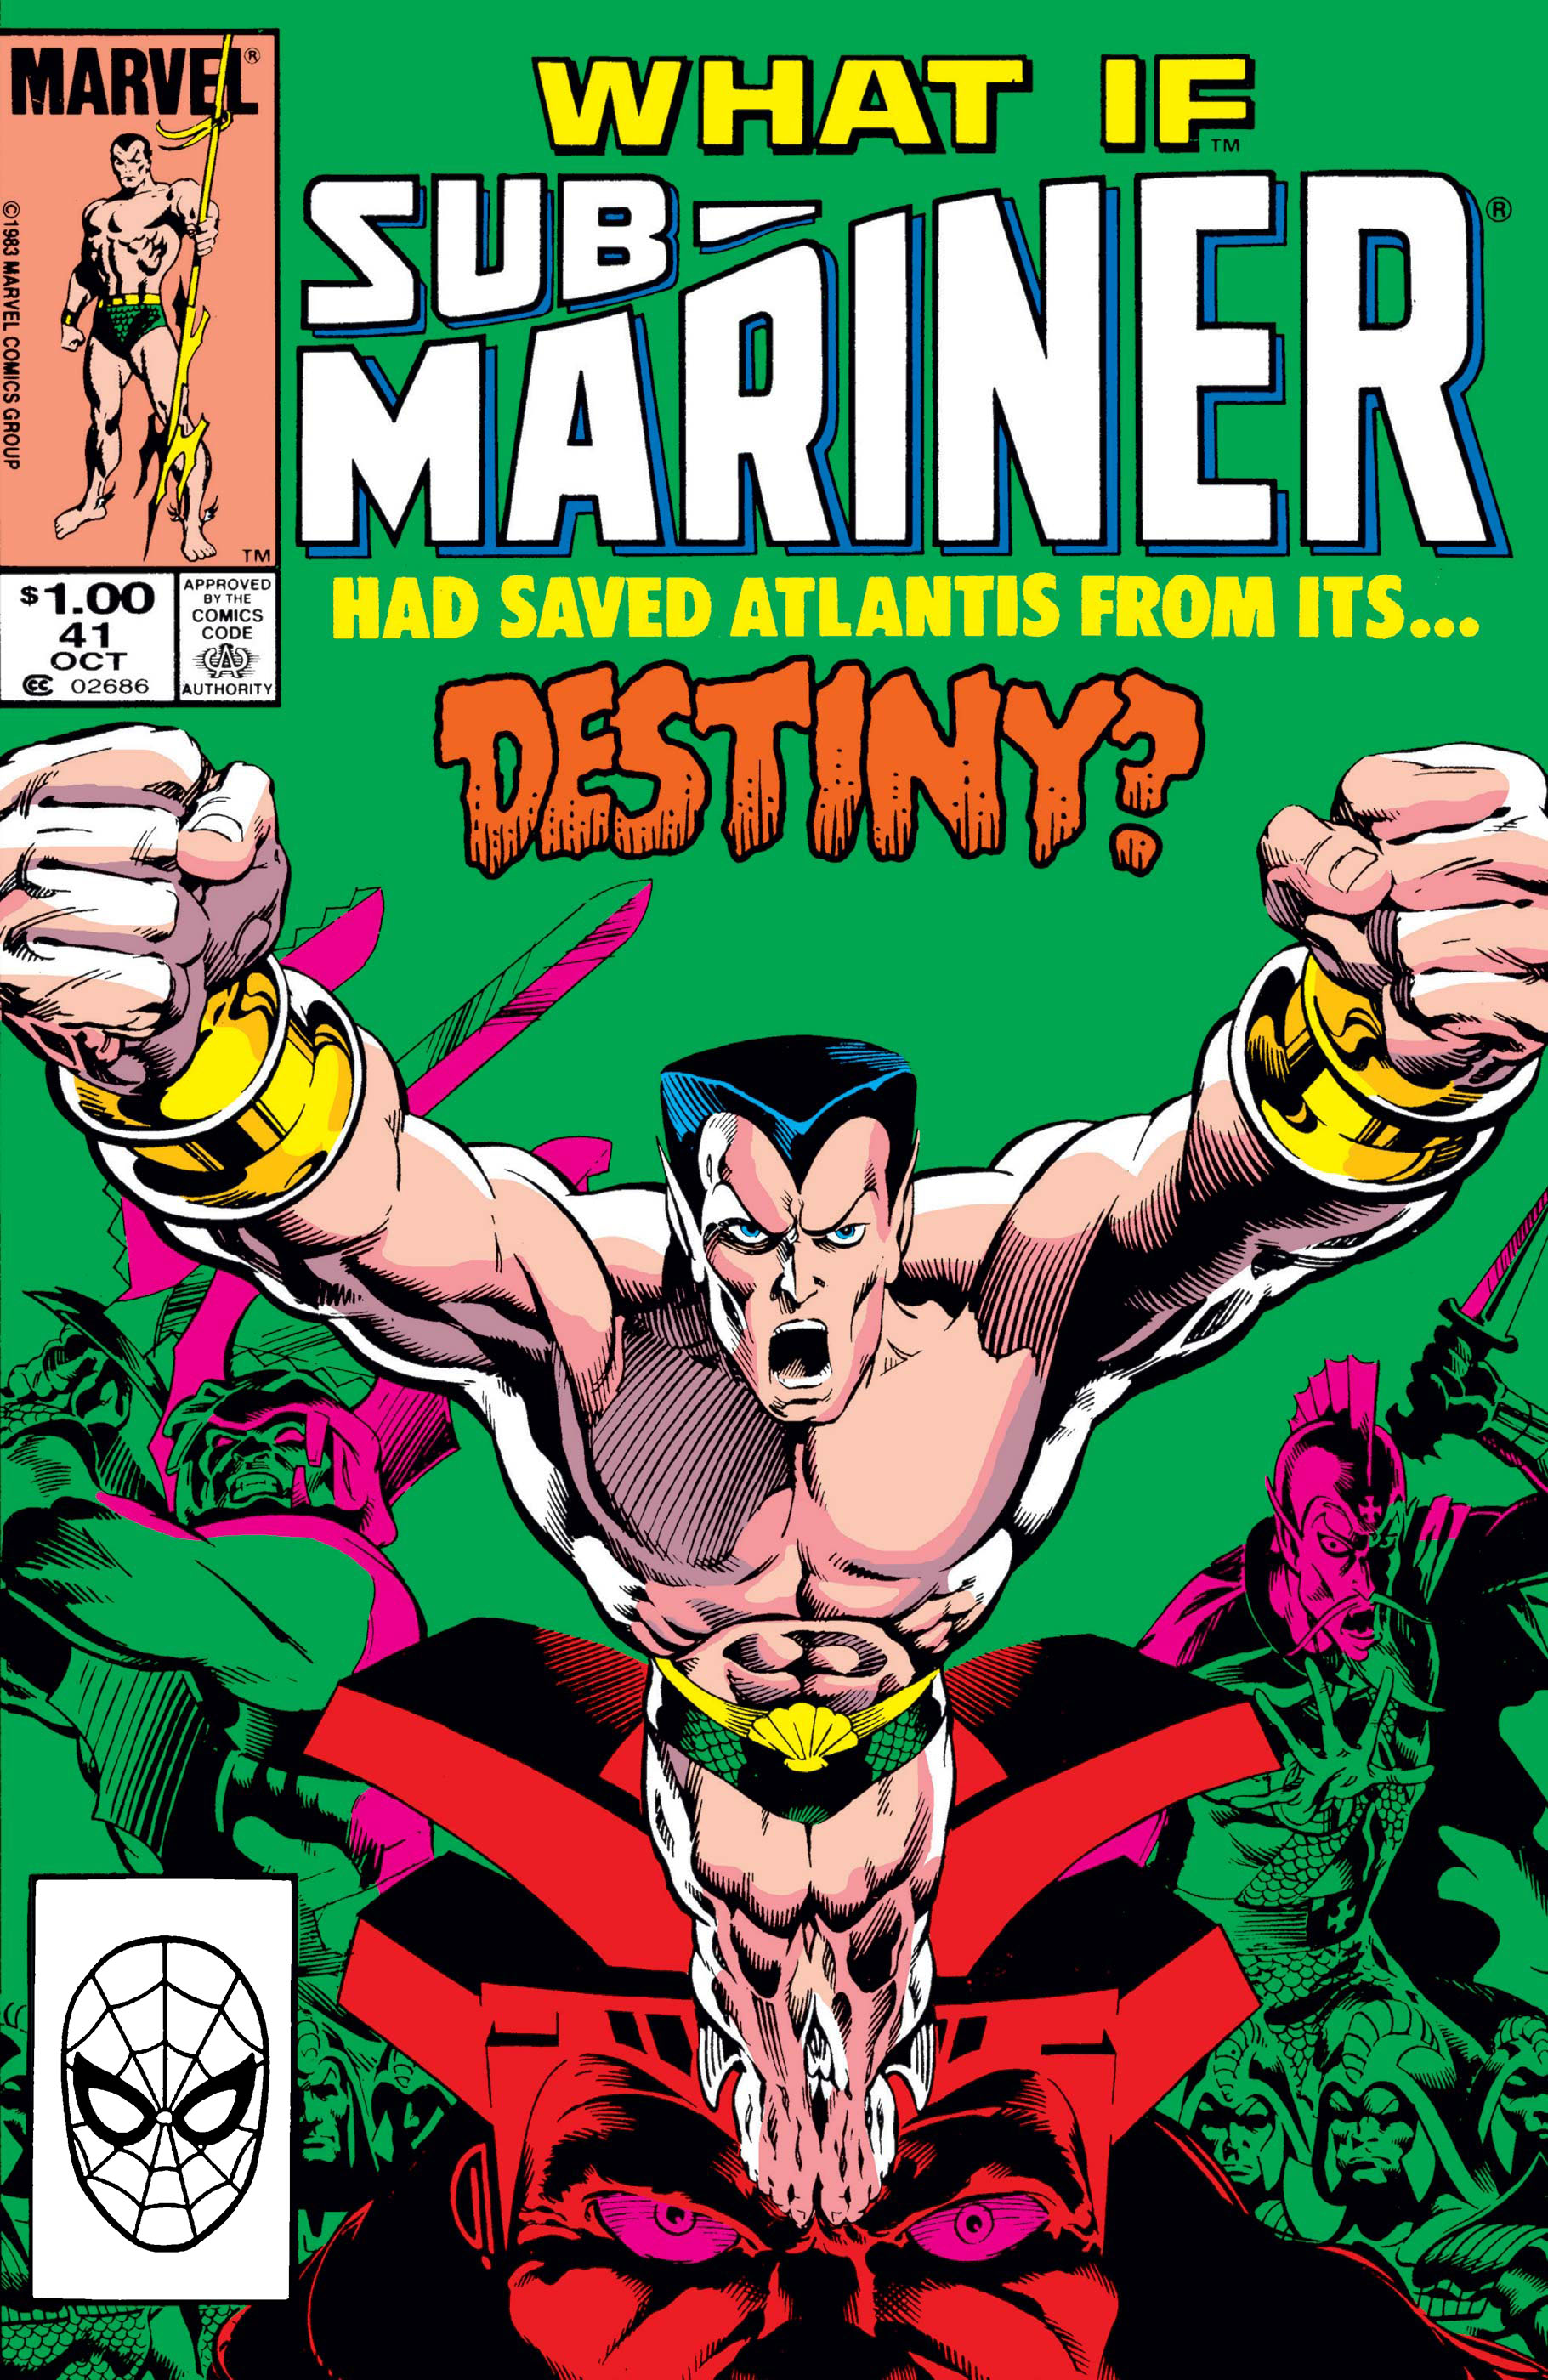 What If? (1977) #41